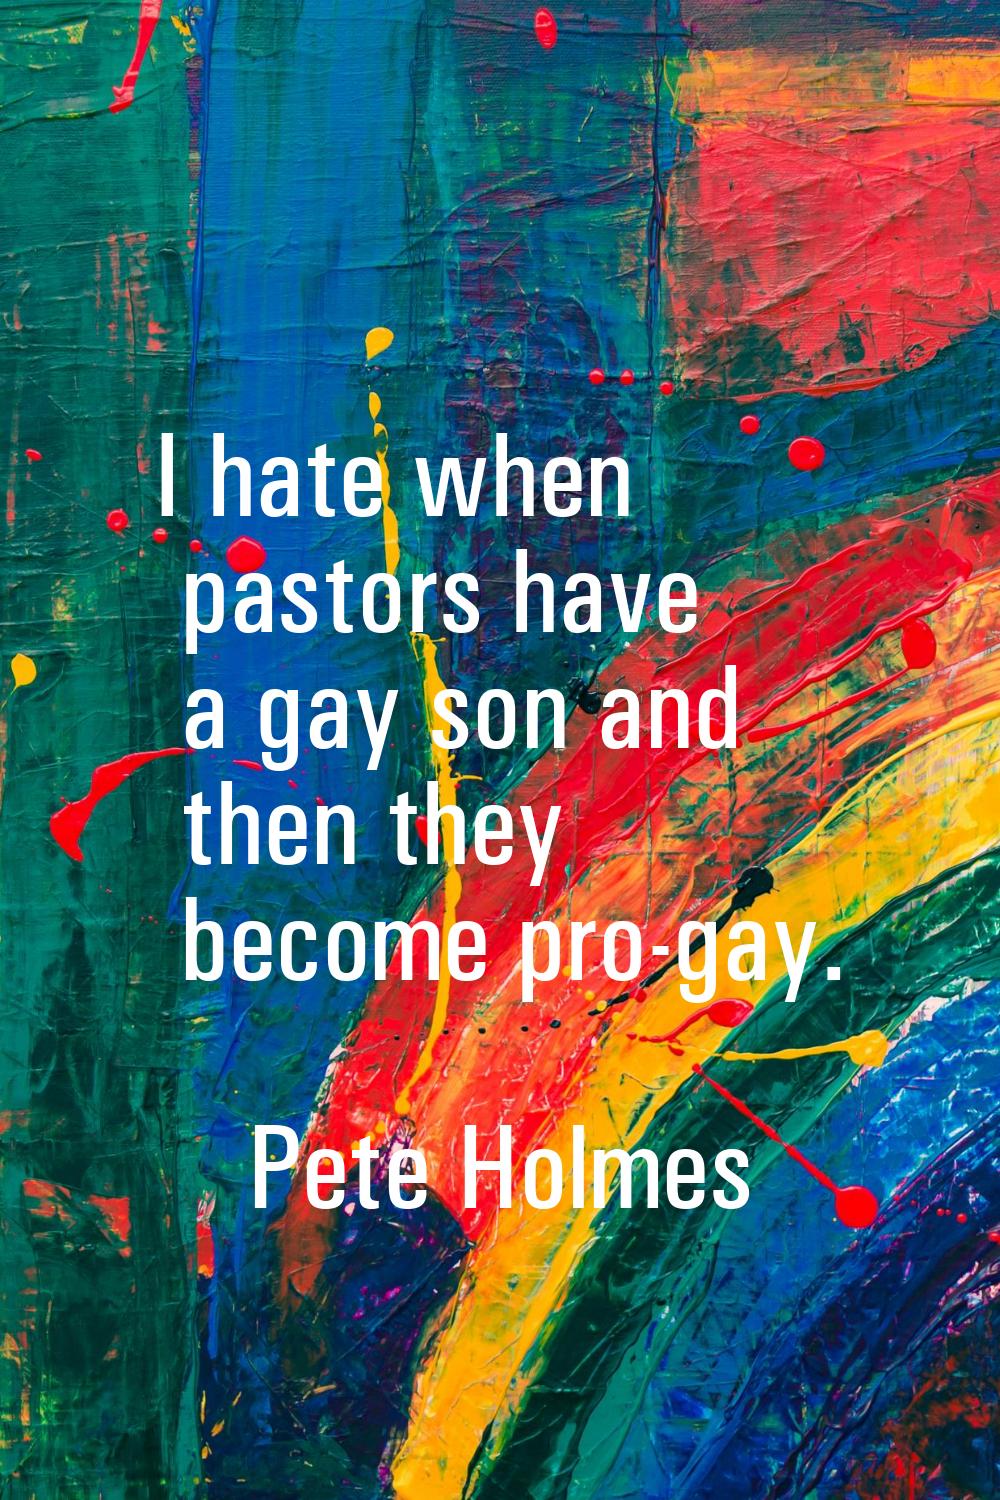 I hate when pastors have a gay son and then they become pro-gay.